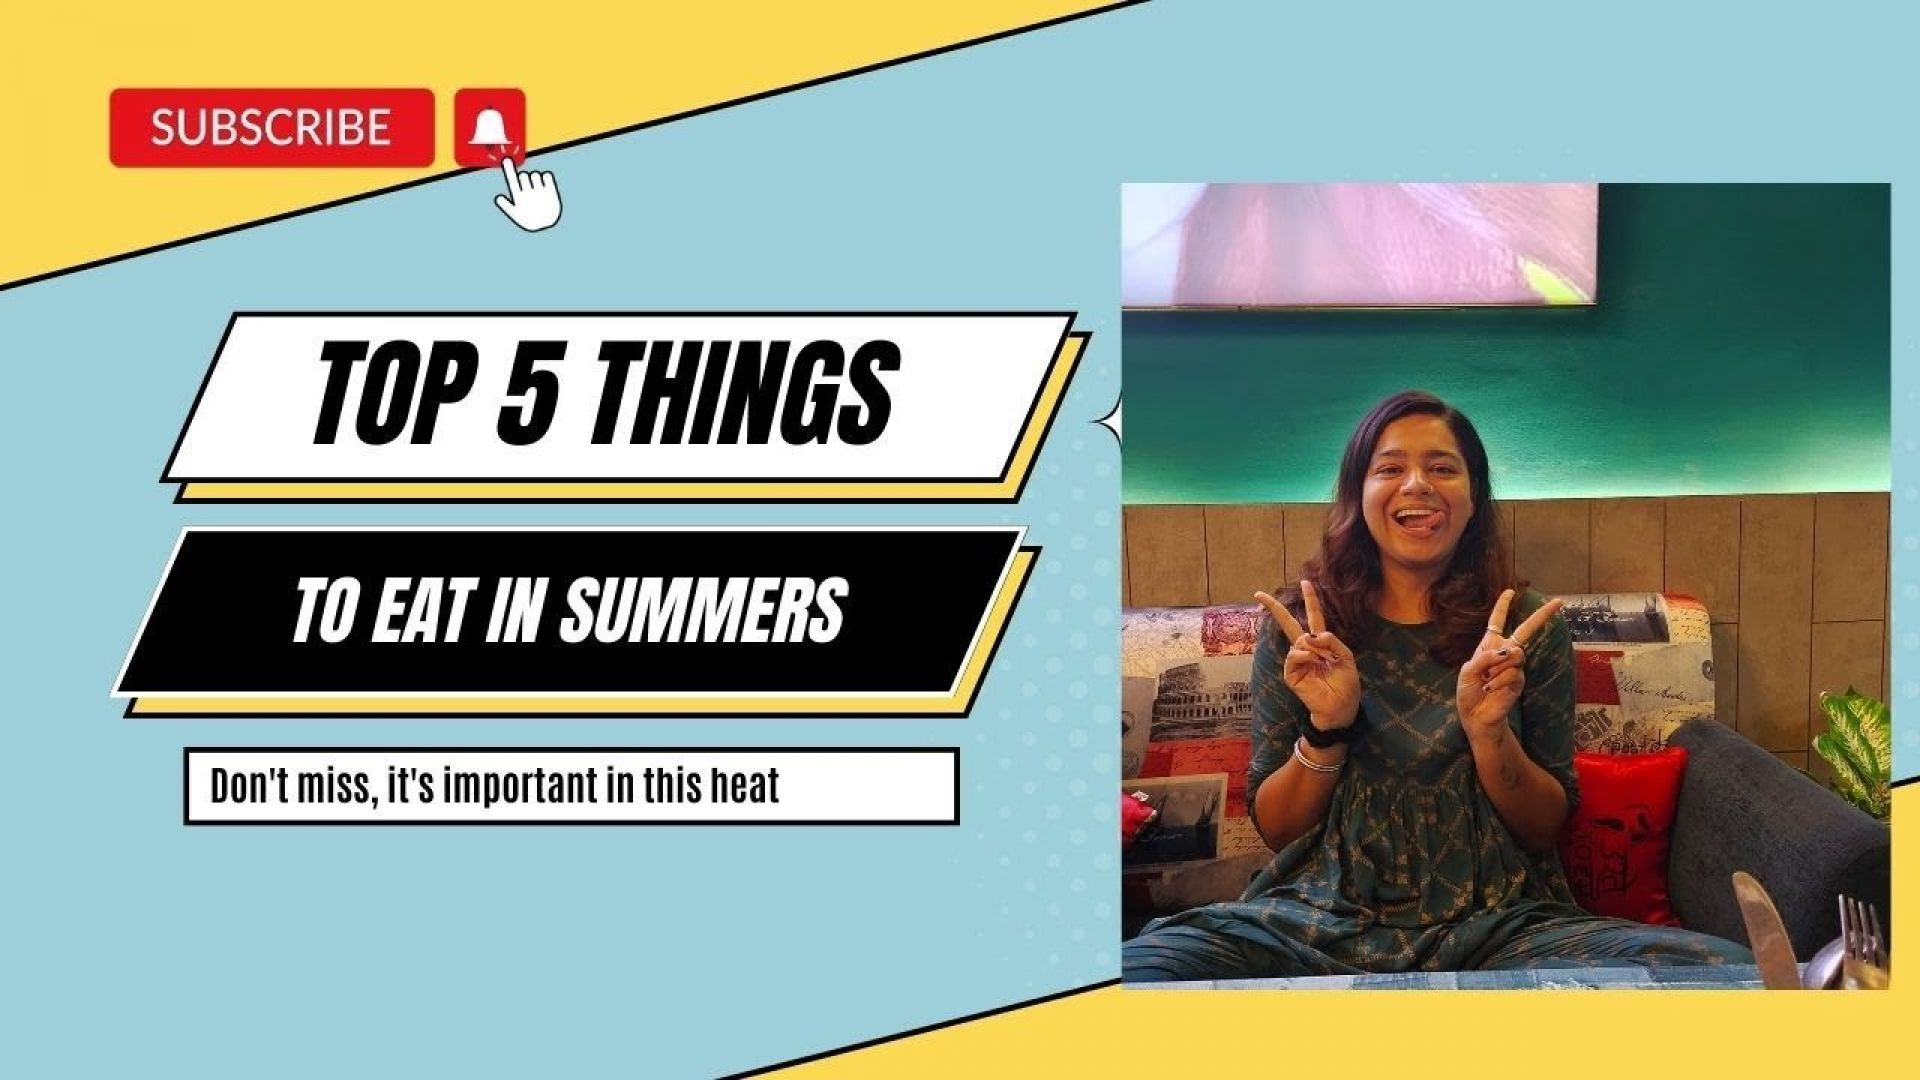 The top 5 things to eat in summer | #beawesome #mohali #chandigarh #mohali3b2